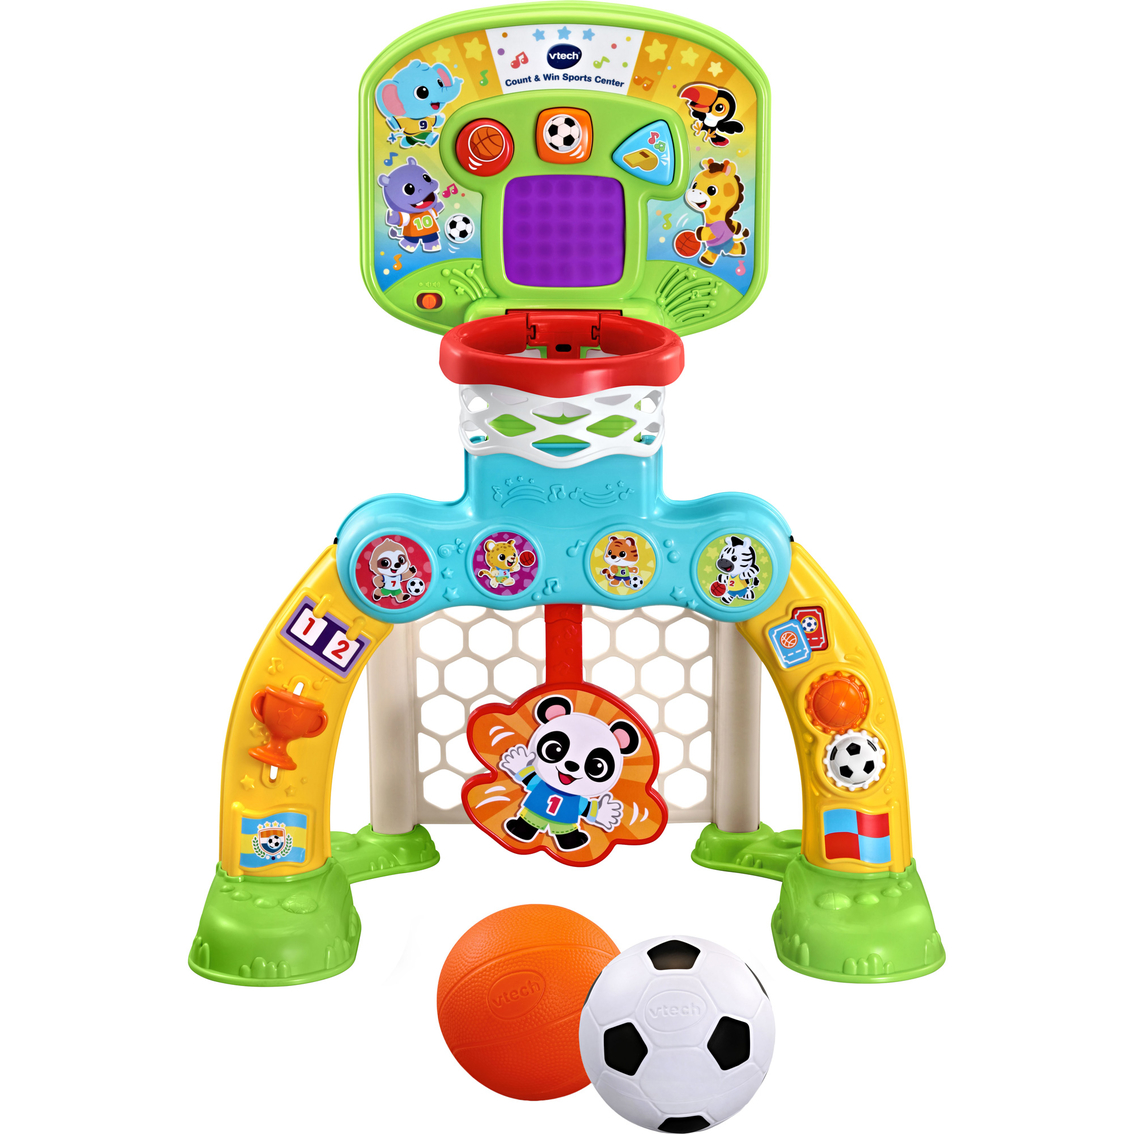 Vtech Count & Win Sports Center - Image 2 of 3